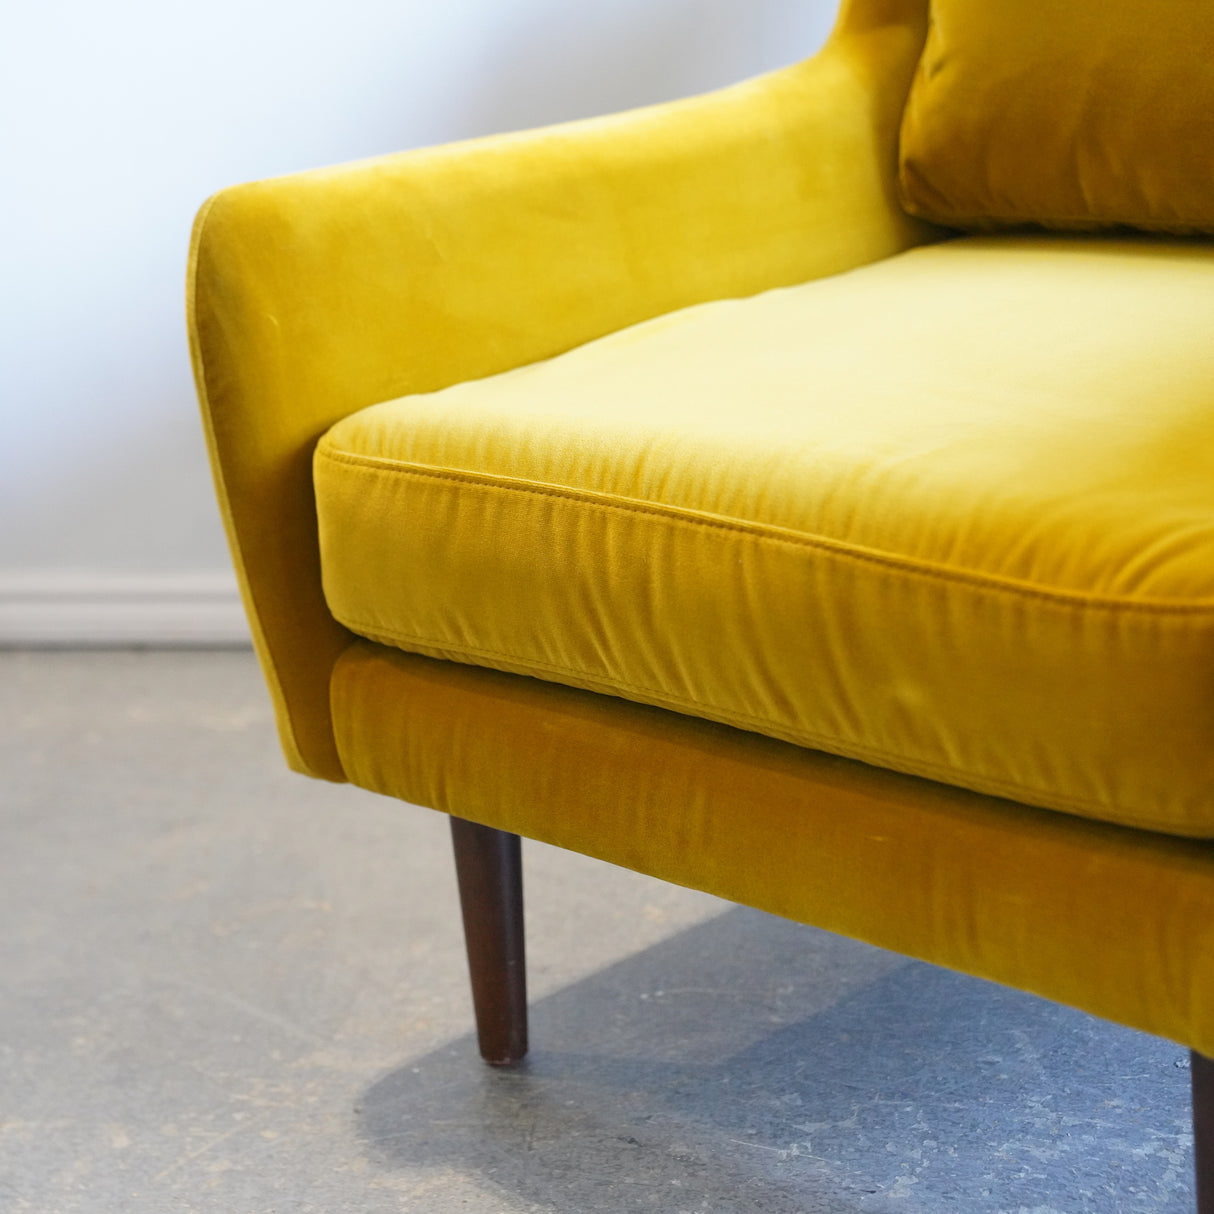 Article Matric Velvet Yarrow Gold Accent chair